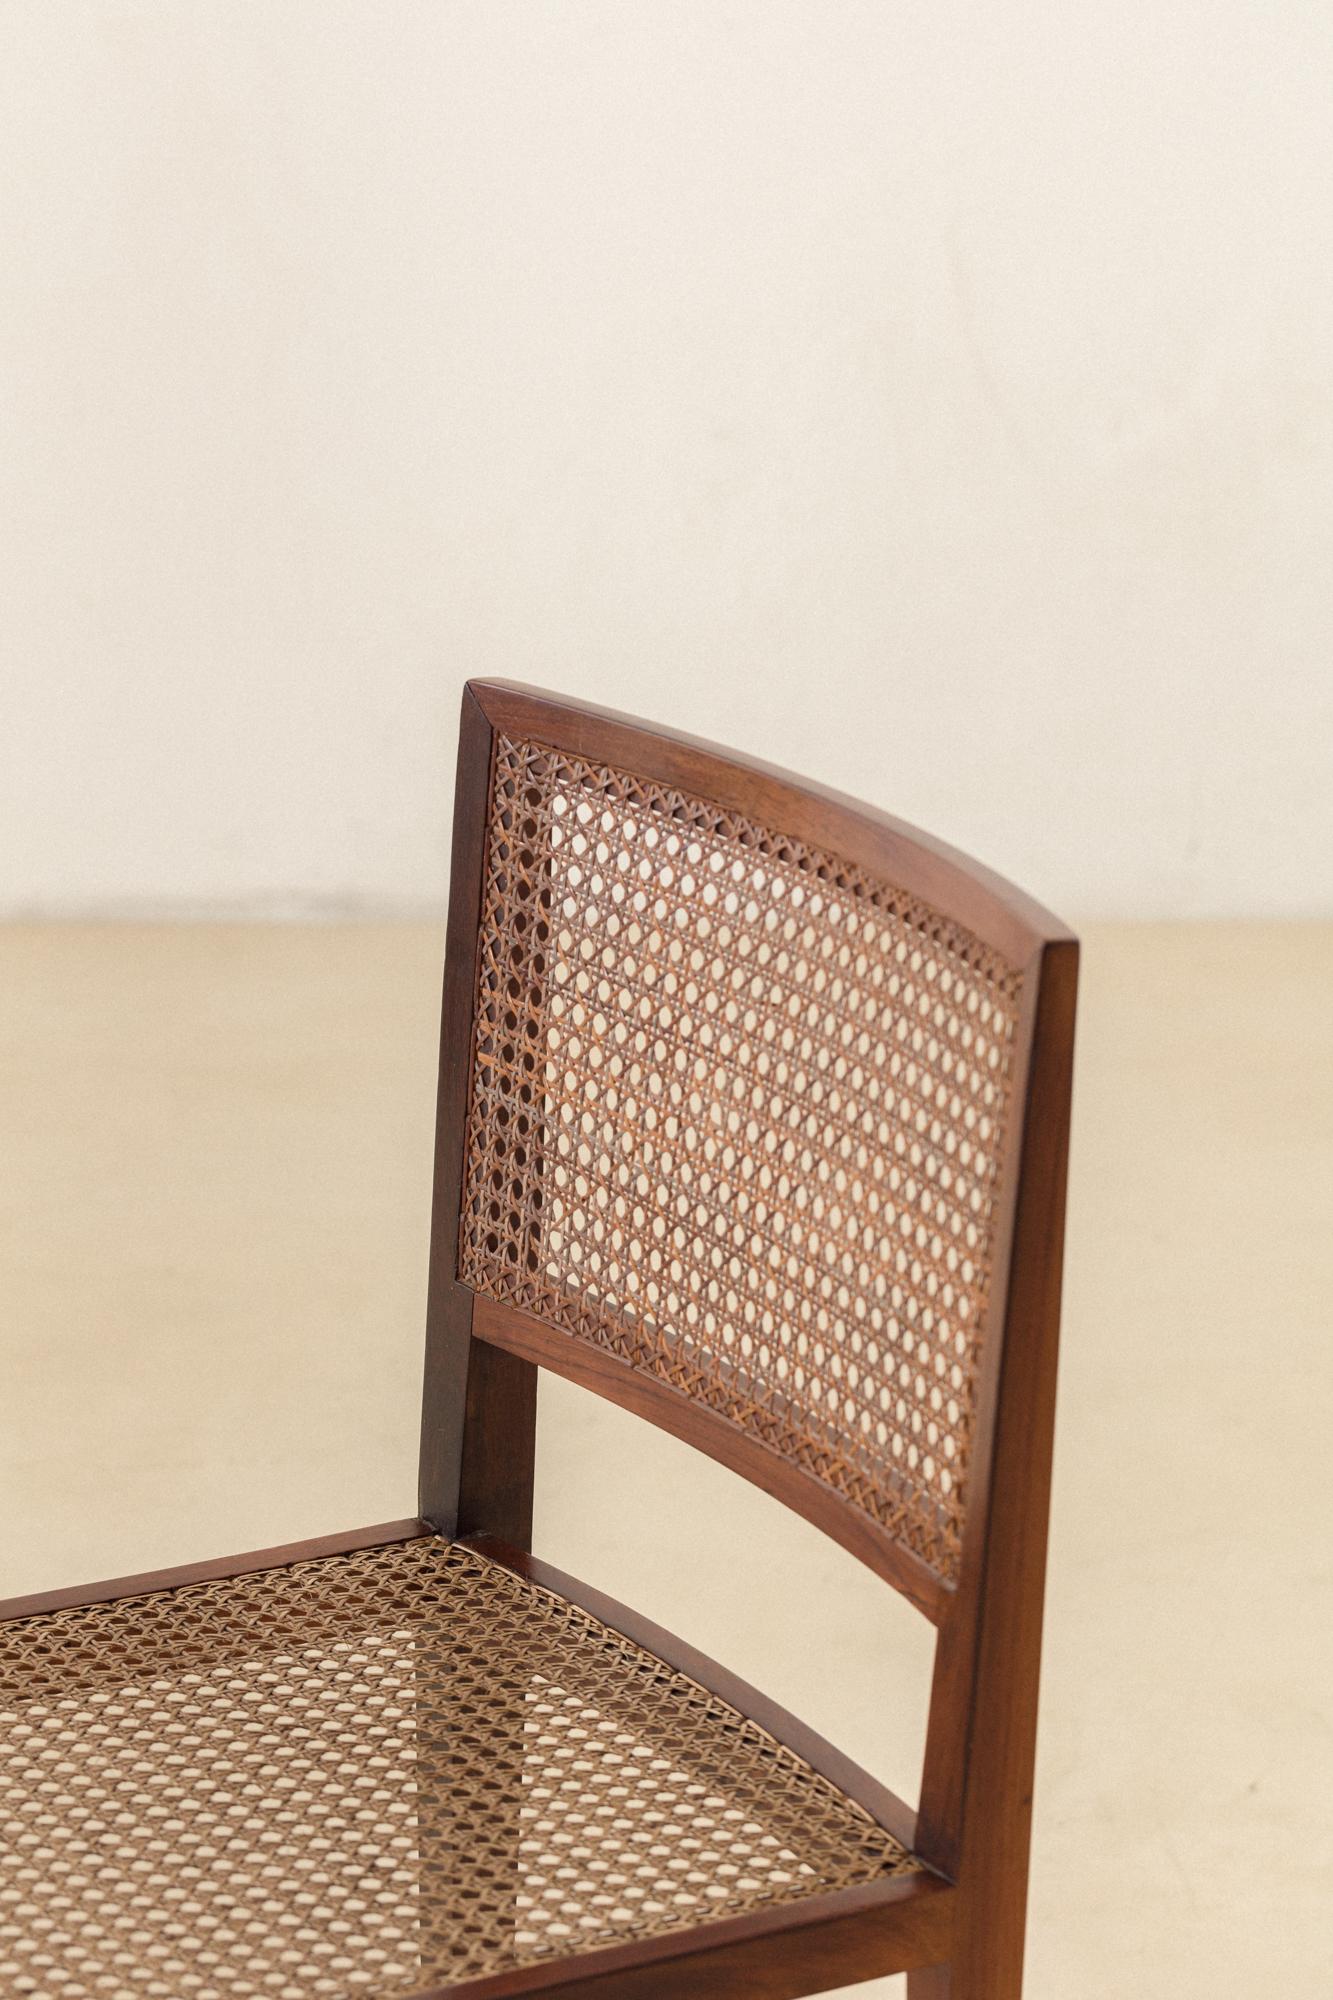 20th Century Rosewood and Cane Dining Chairs, M.L. Magalhães, 1960s, Midcentury Brazilian